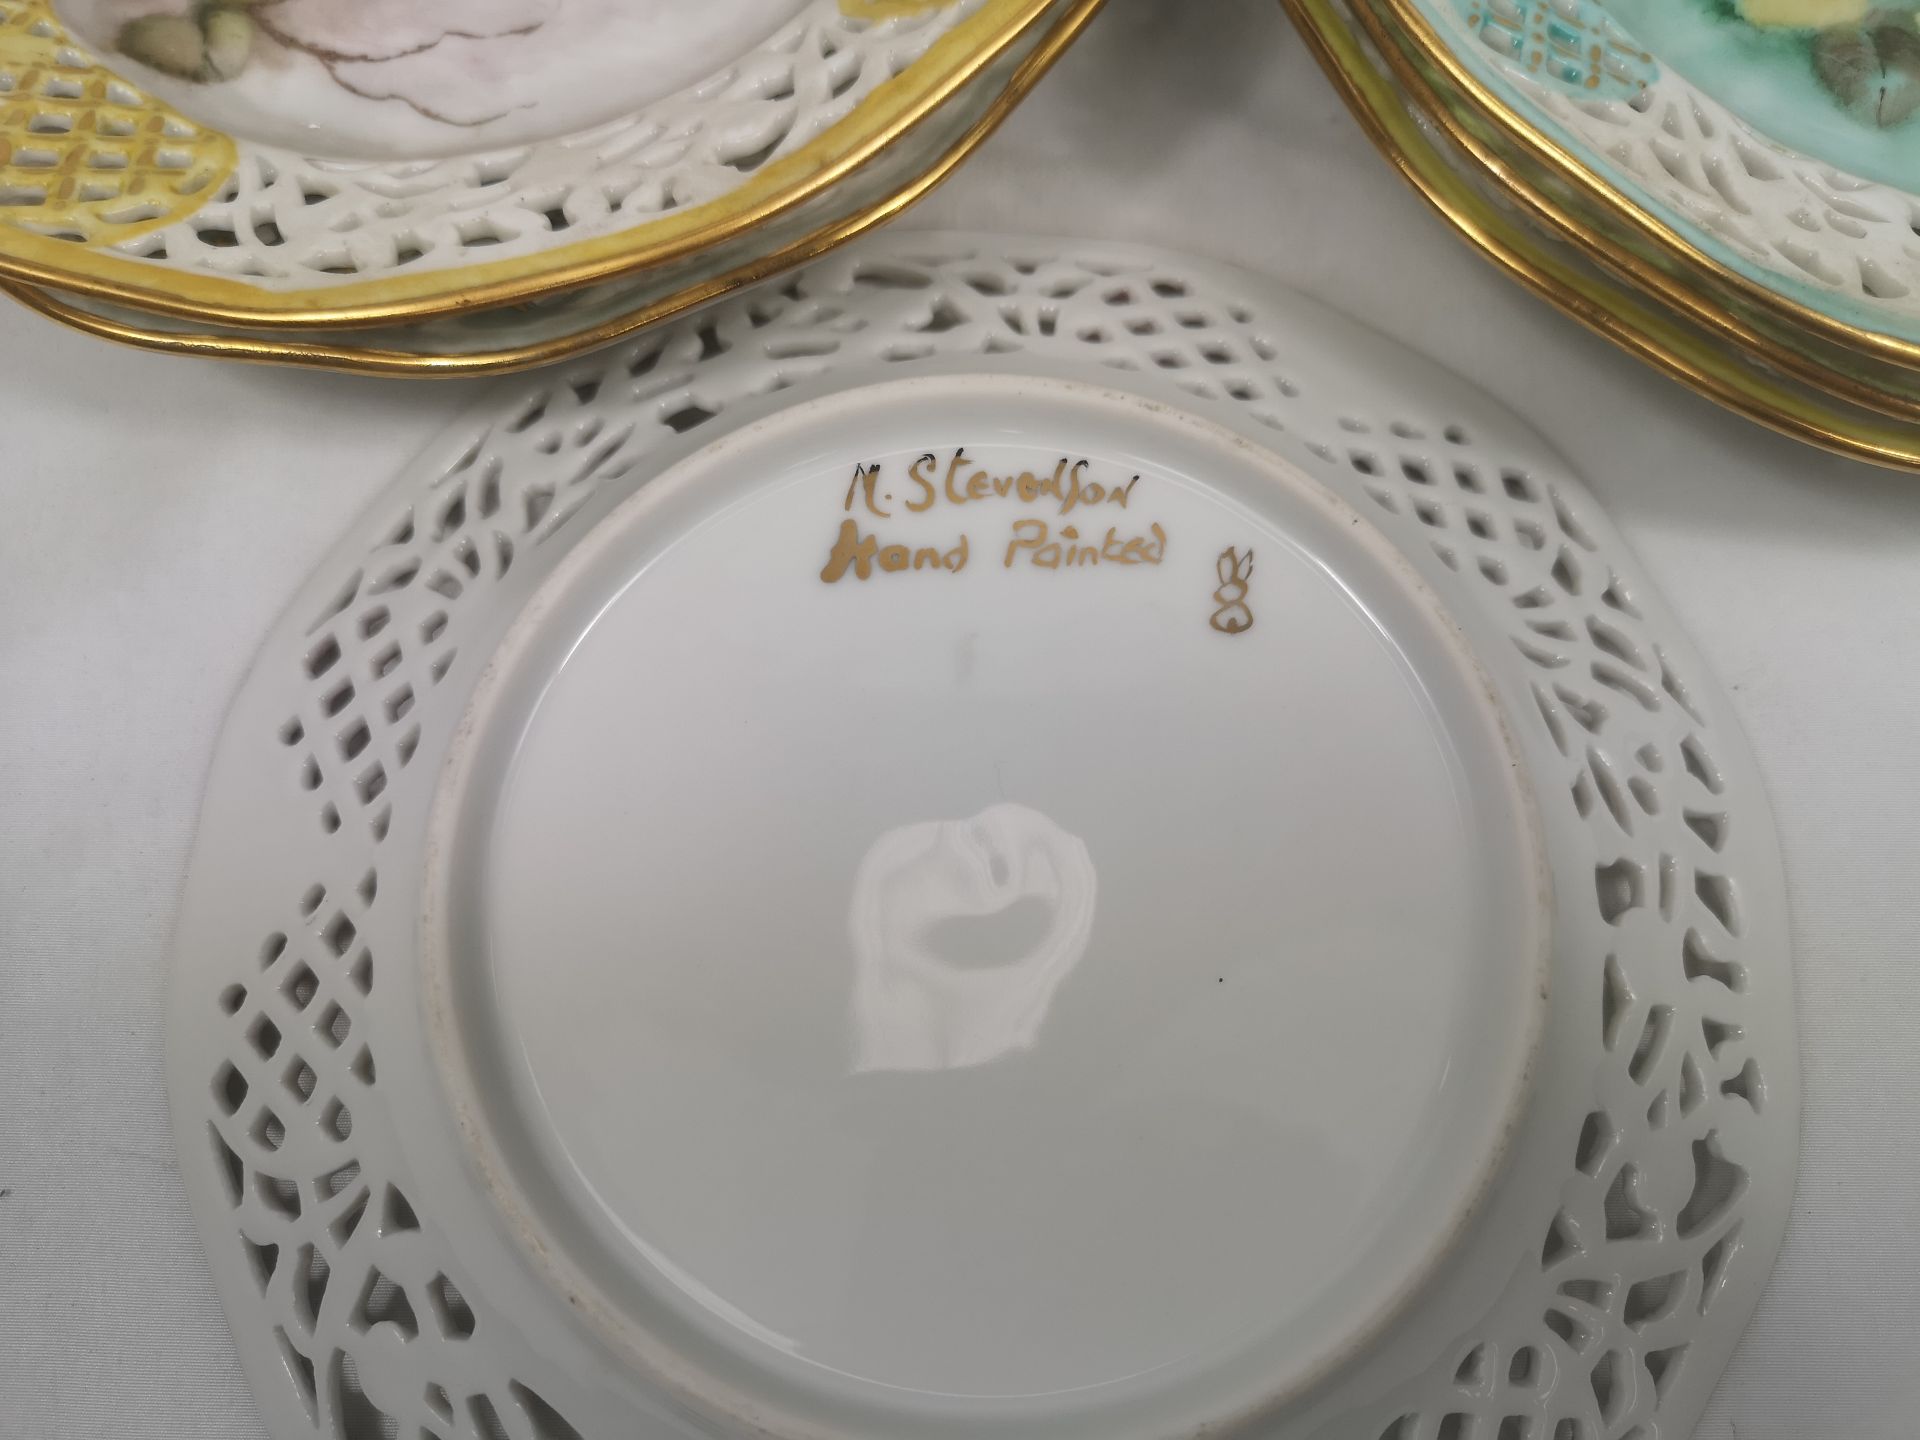 Quantity of hand painted plates and bowls by Marjorie Stevenson - Image 3 of 8